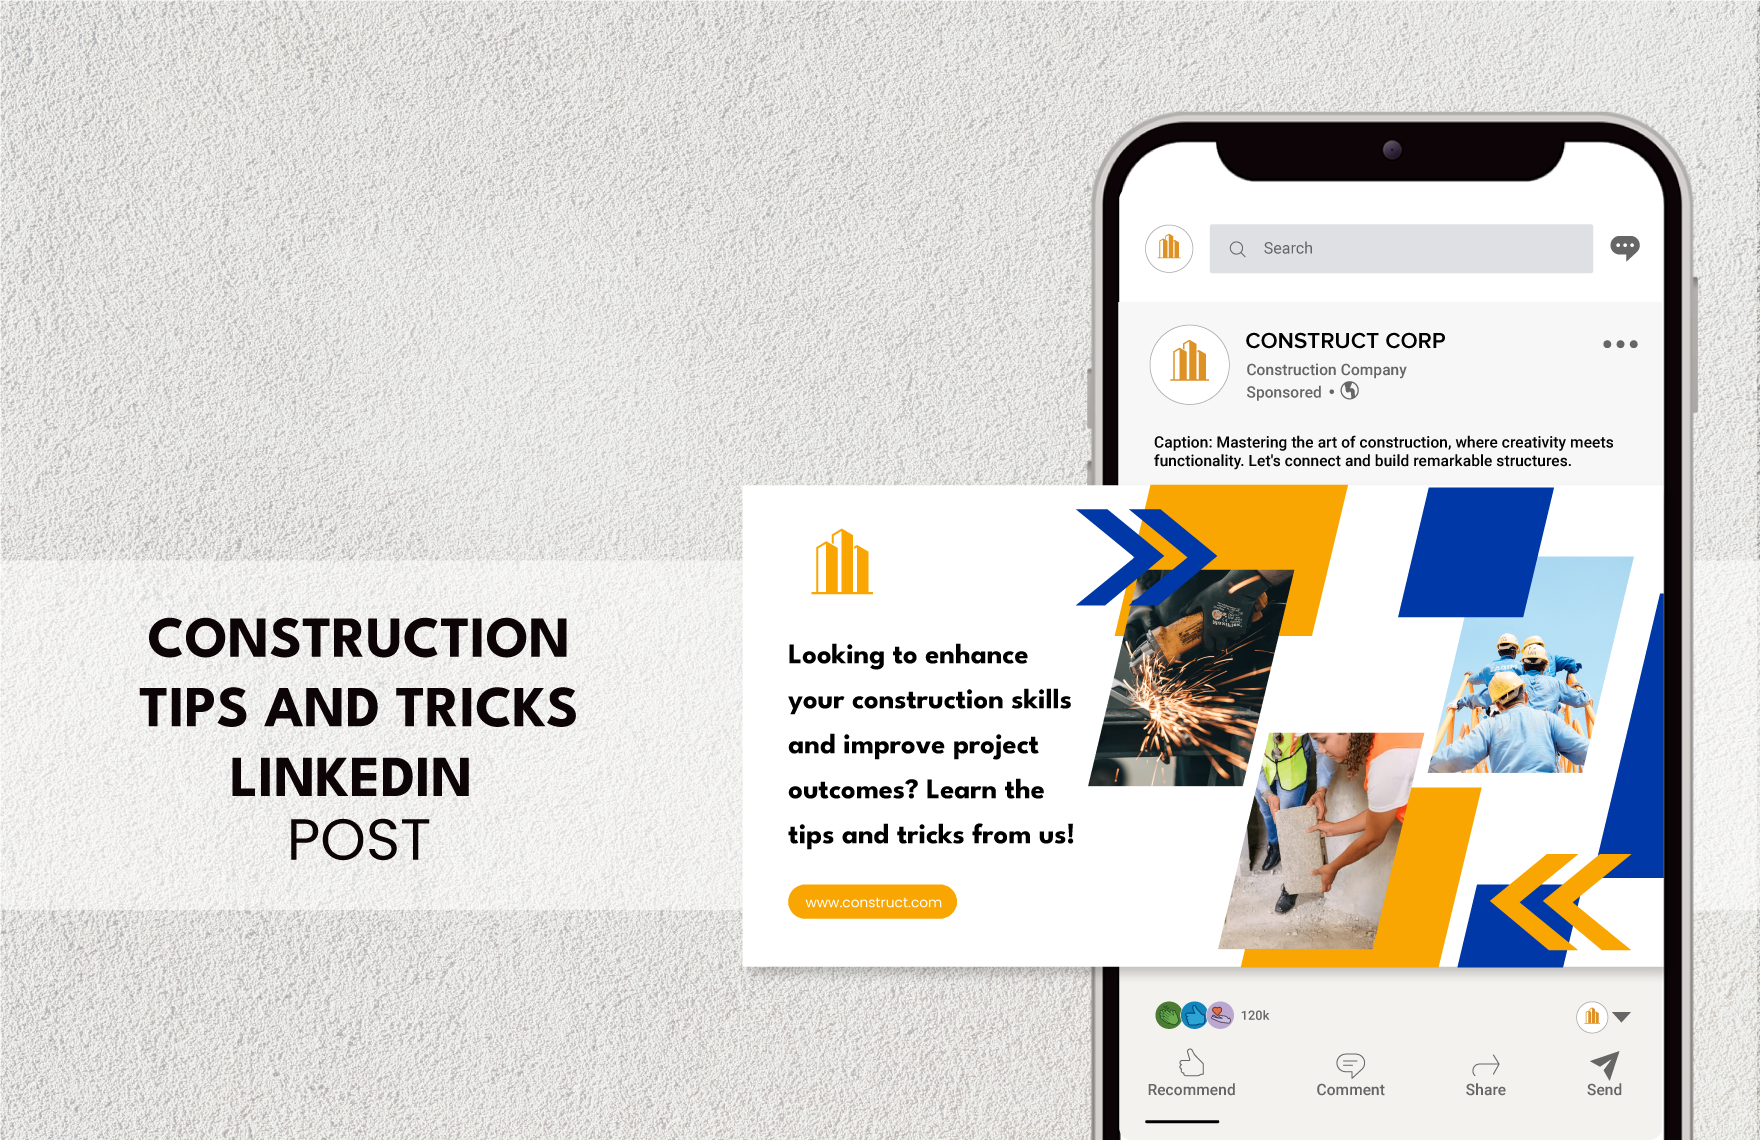 Construction Tips and Tricks LinkedIn Post